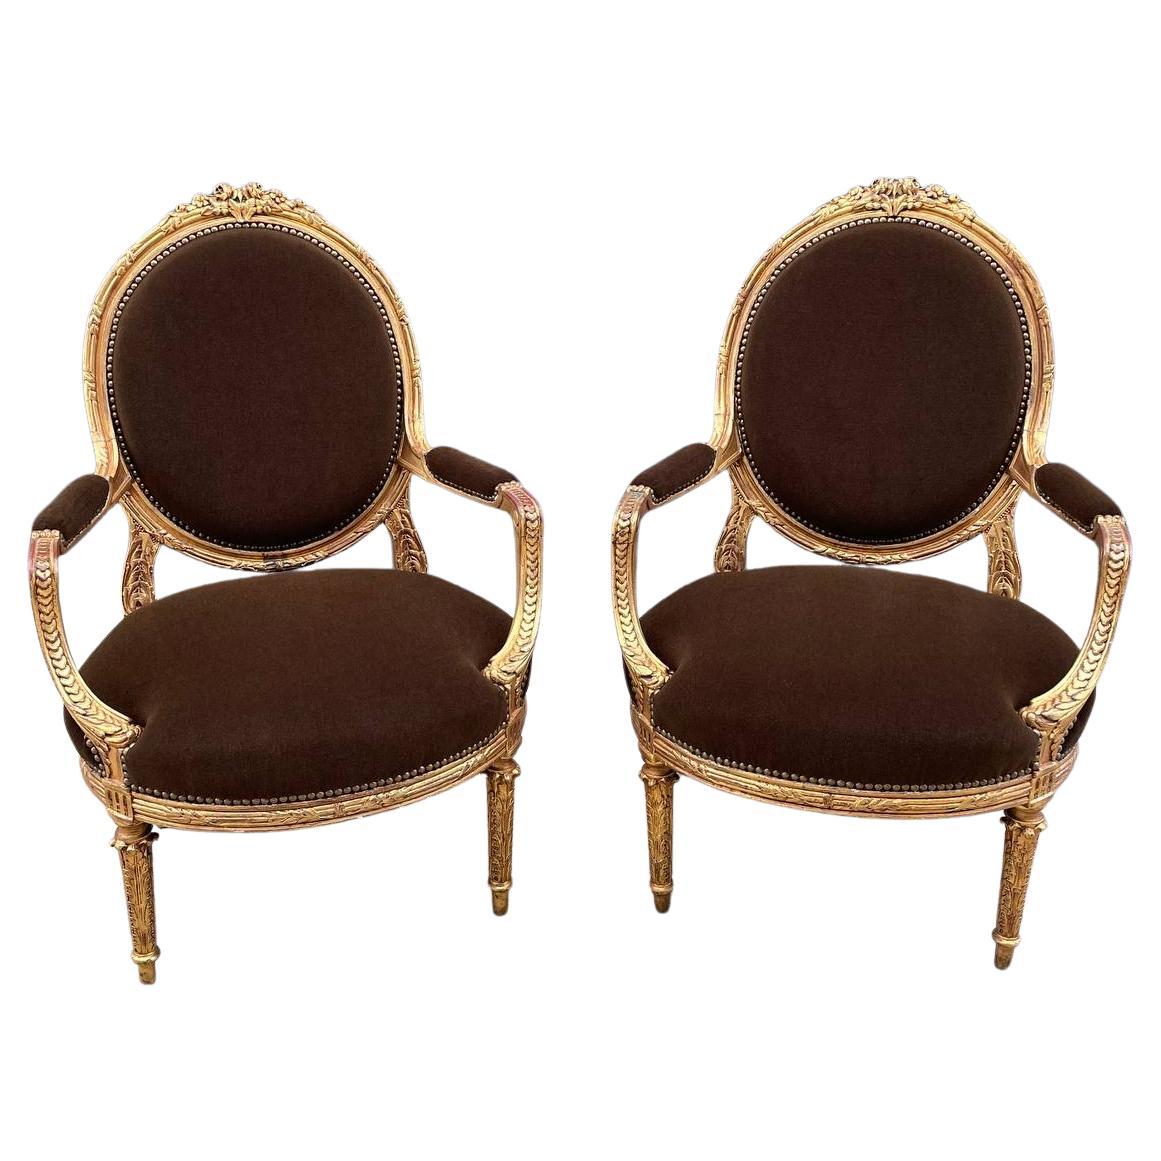 Pair of French Neoclassical-Style Giltwood Armchairs For Sale